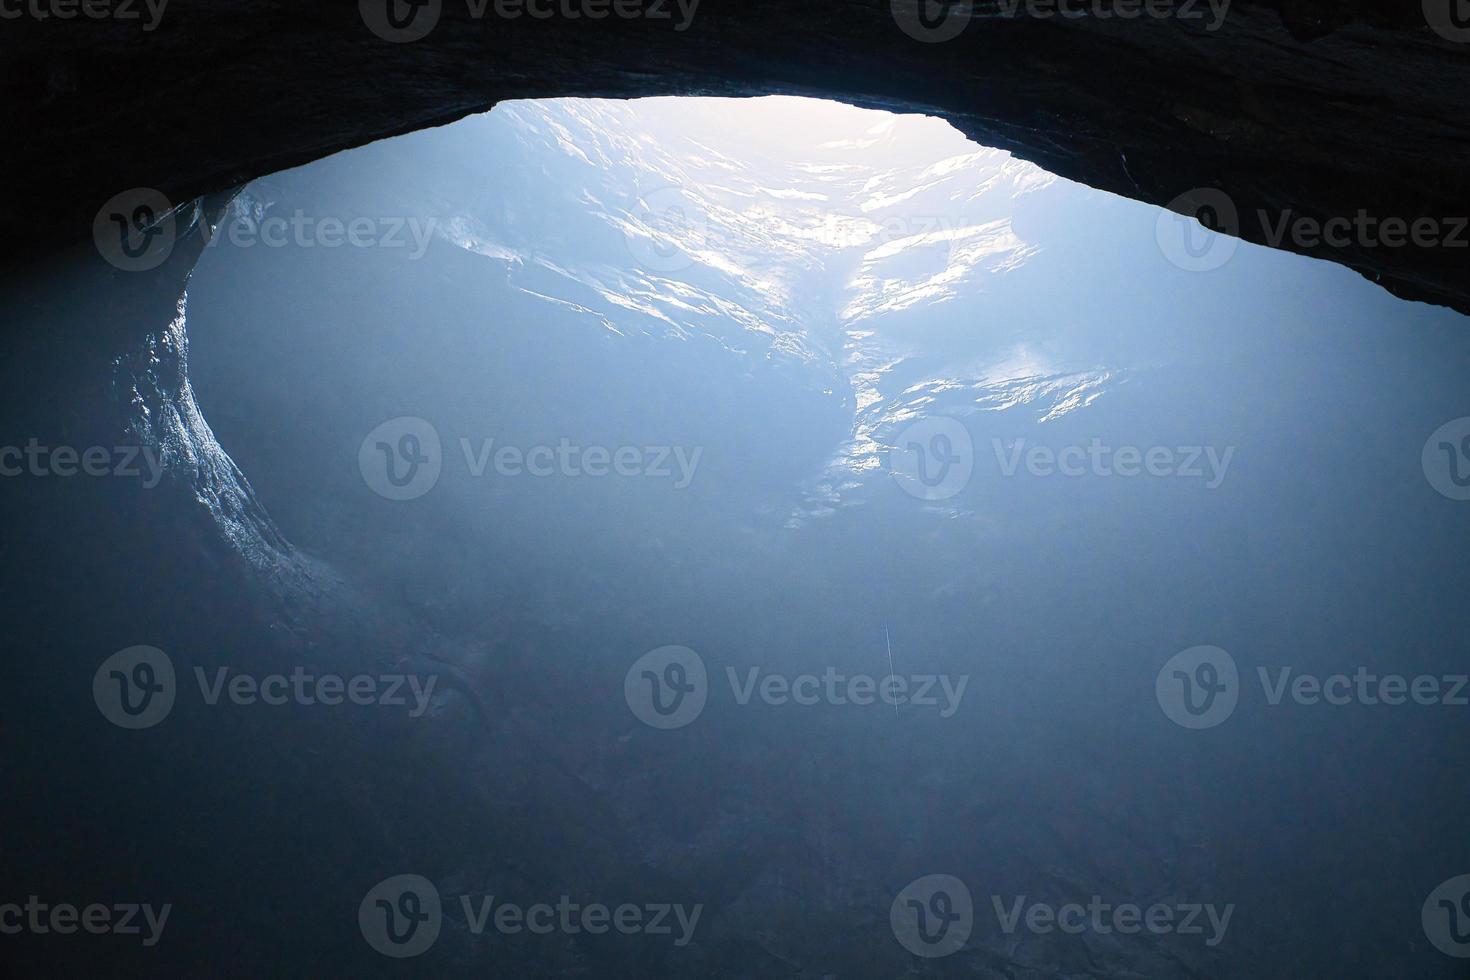 Rock cave with hole through which light shines. Underworlds in Sweden. Mystical photo